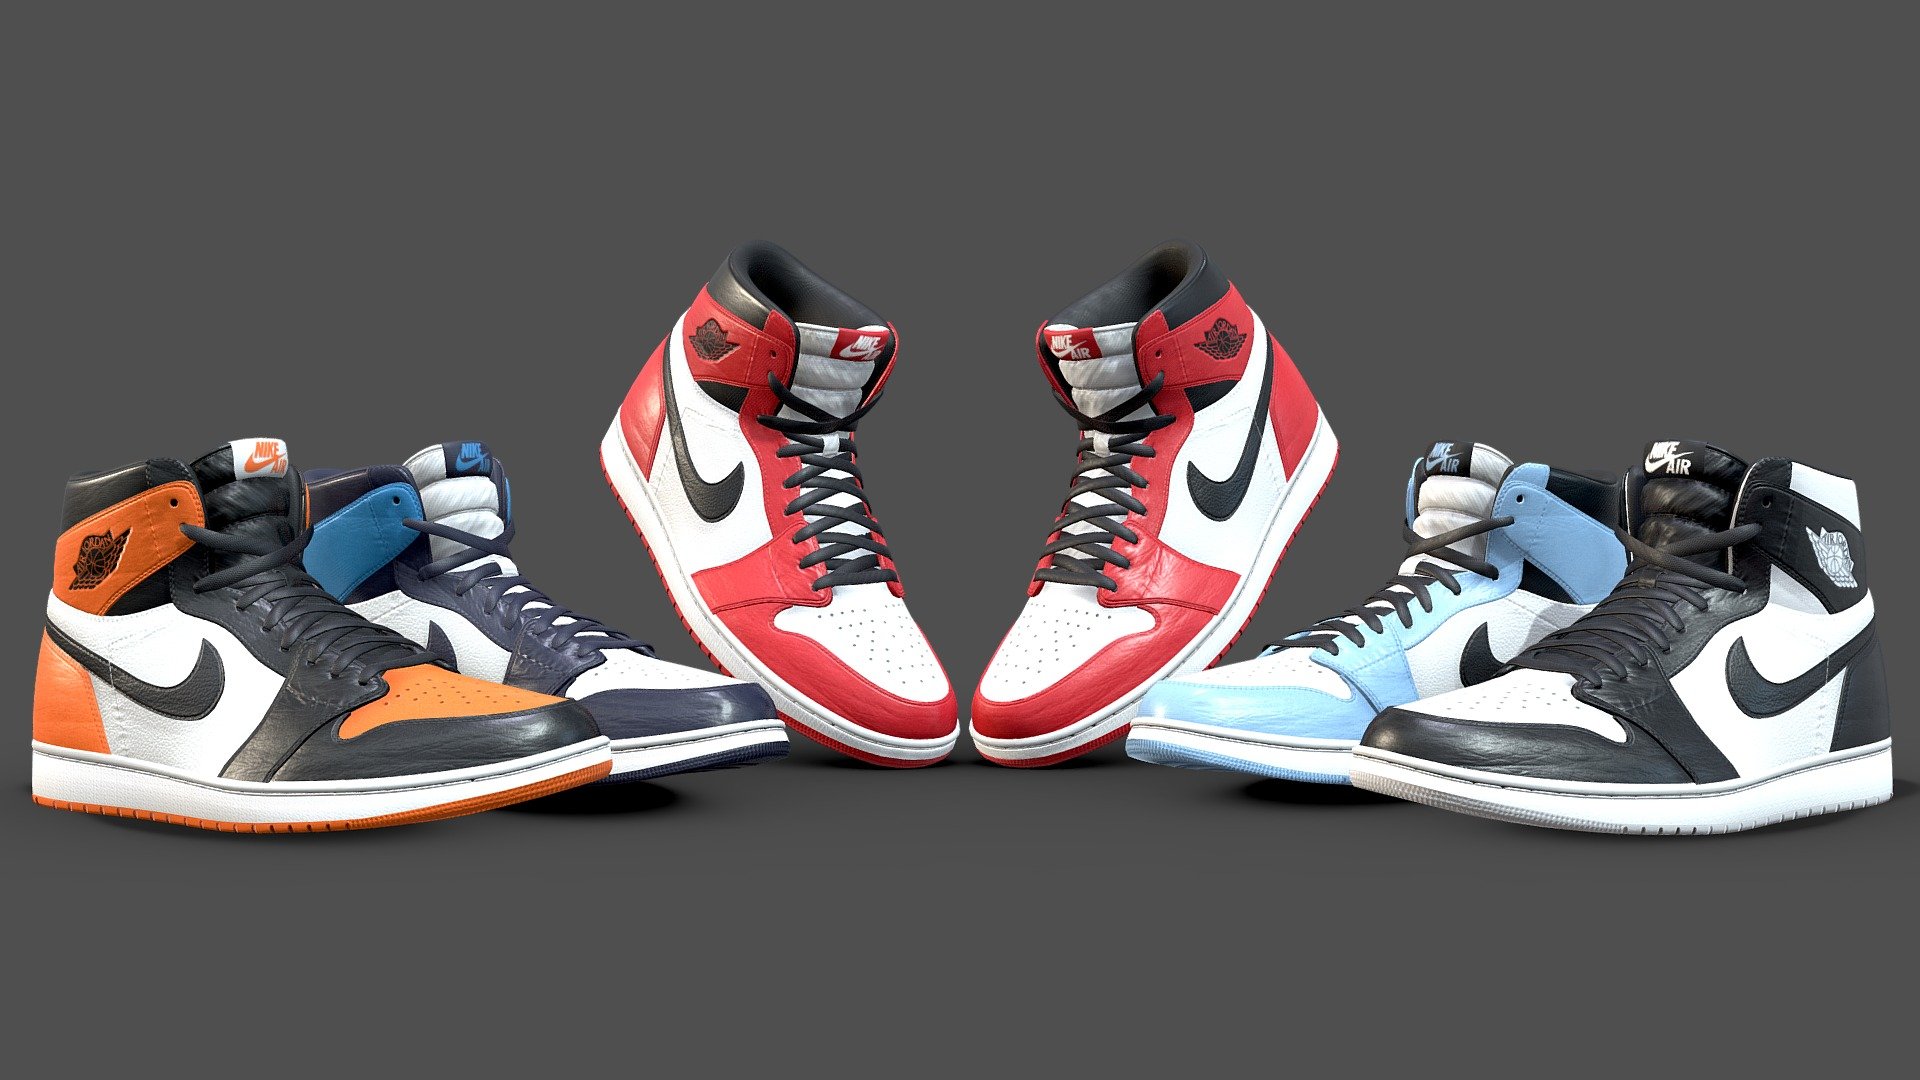 Optimised, low poly version of my Jordan 1 model in 5 colourways. The mesh uses just one texture set that covers both shoes and each shoe has a polycount of 17,537. This version would be ideal for in game use, or as an accessory to a render where the shoes are not the focus. The high detailed version of this model can be purchased here: https://skfb.ly/ozUPw

Clean, quad topology was used throughout the shoe. I have also included a rigged version, which is quite rudimentary but may be useful for quick manipulations/ attaching to a character.

The five colourways included are: Chicago, Obsidian, Black and White, Shattered Backboard, and University Blue. All colourways come with additional colours for the laces. 3d model